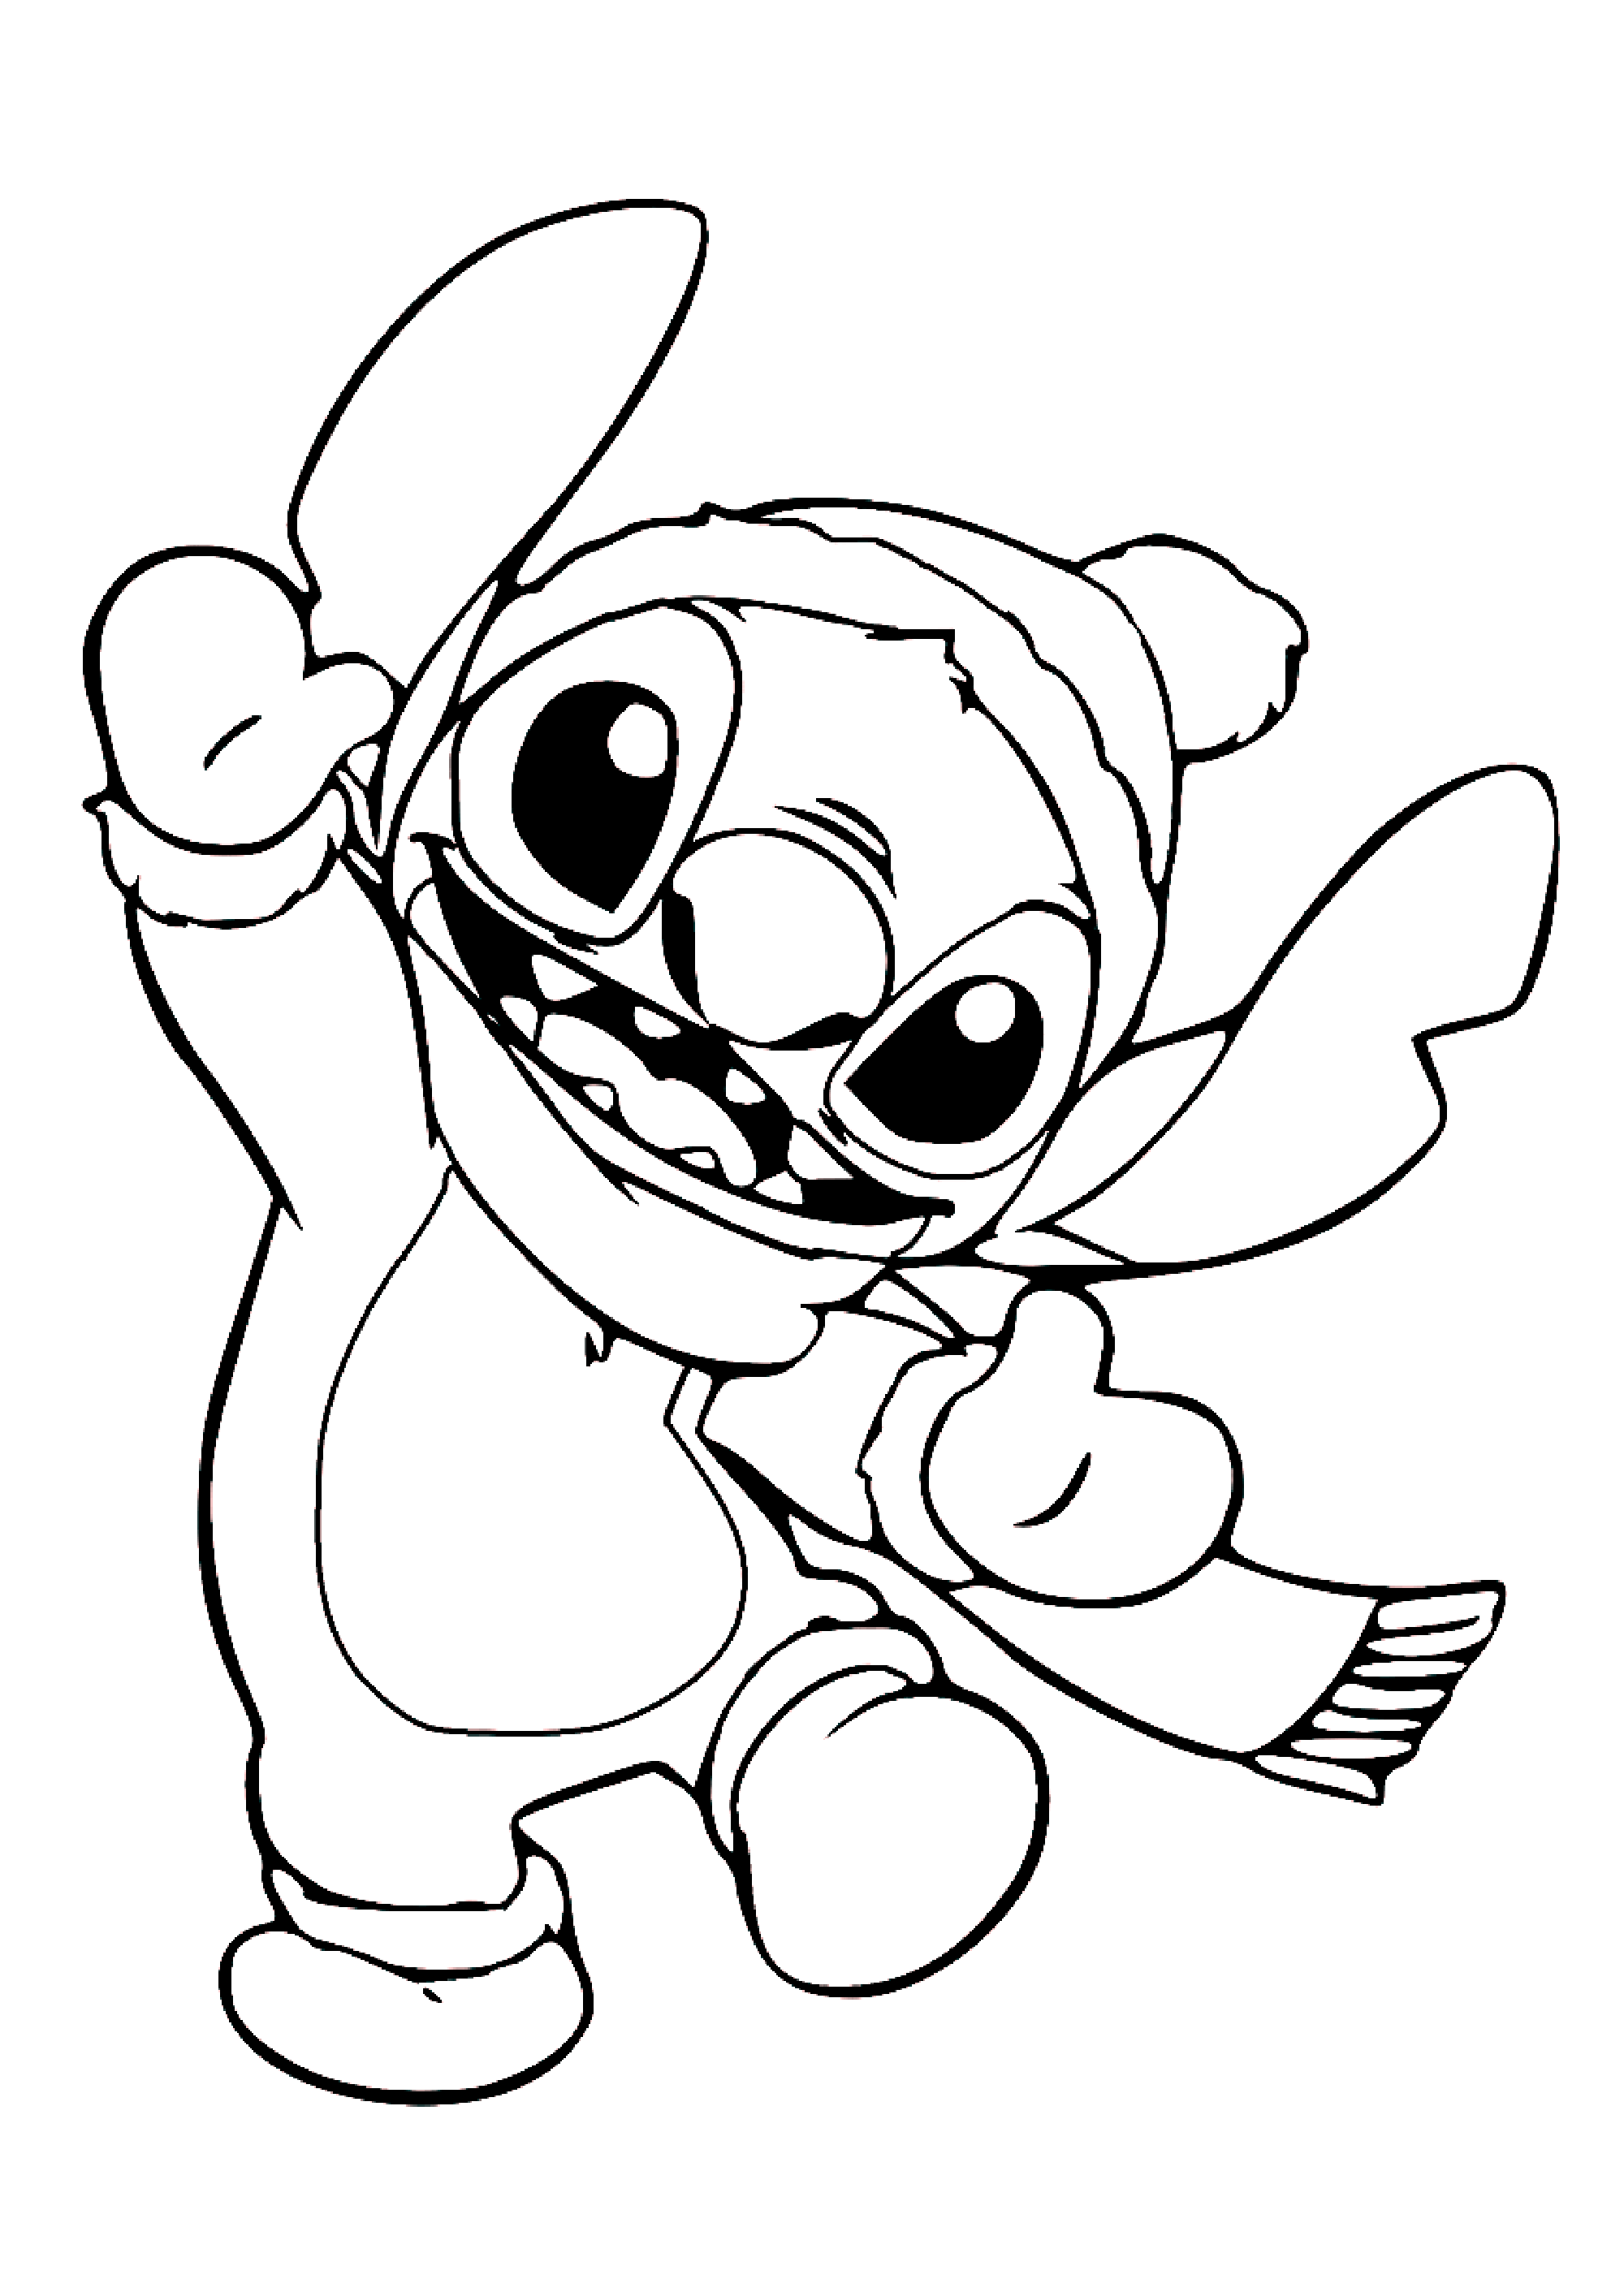 Lilo and Stitch coloring pages for children - Lilo and Stitch Kids ...